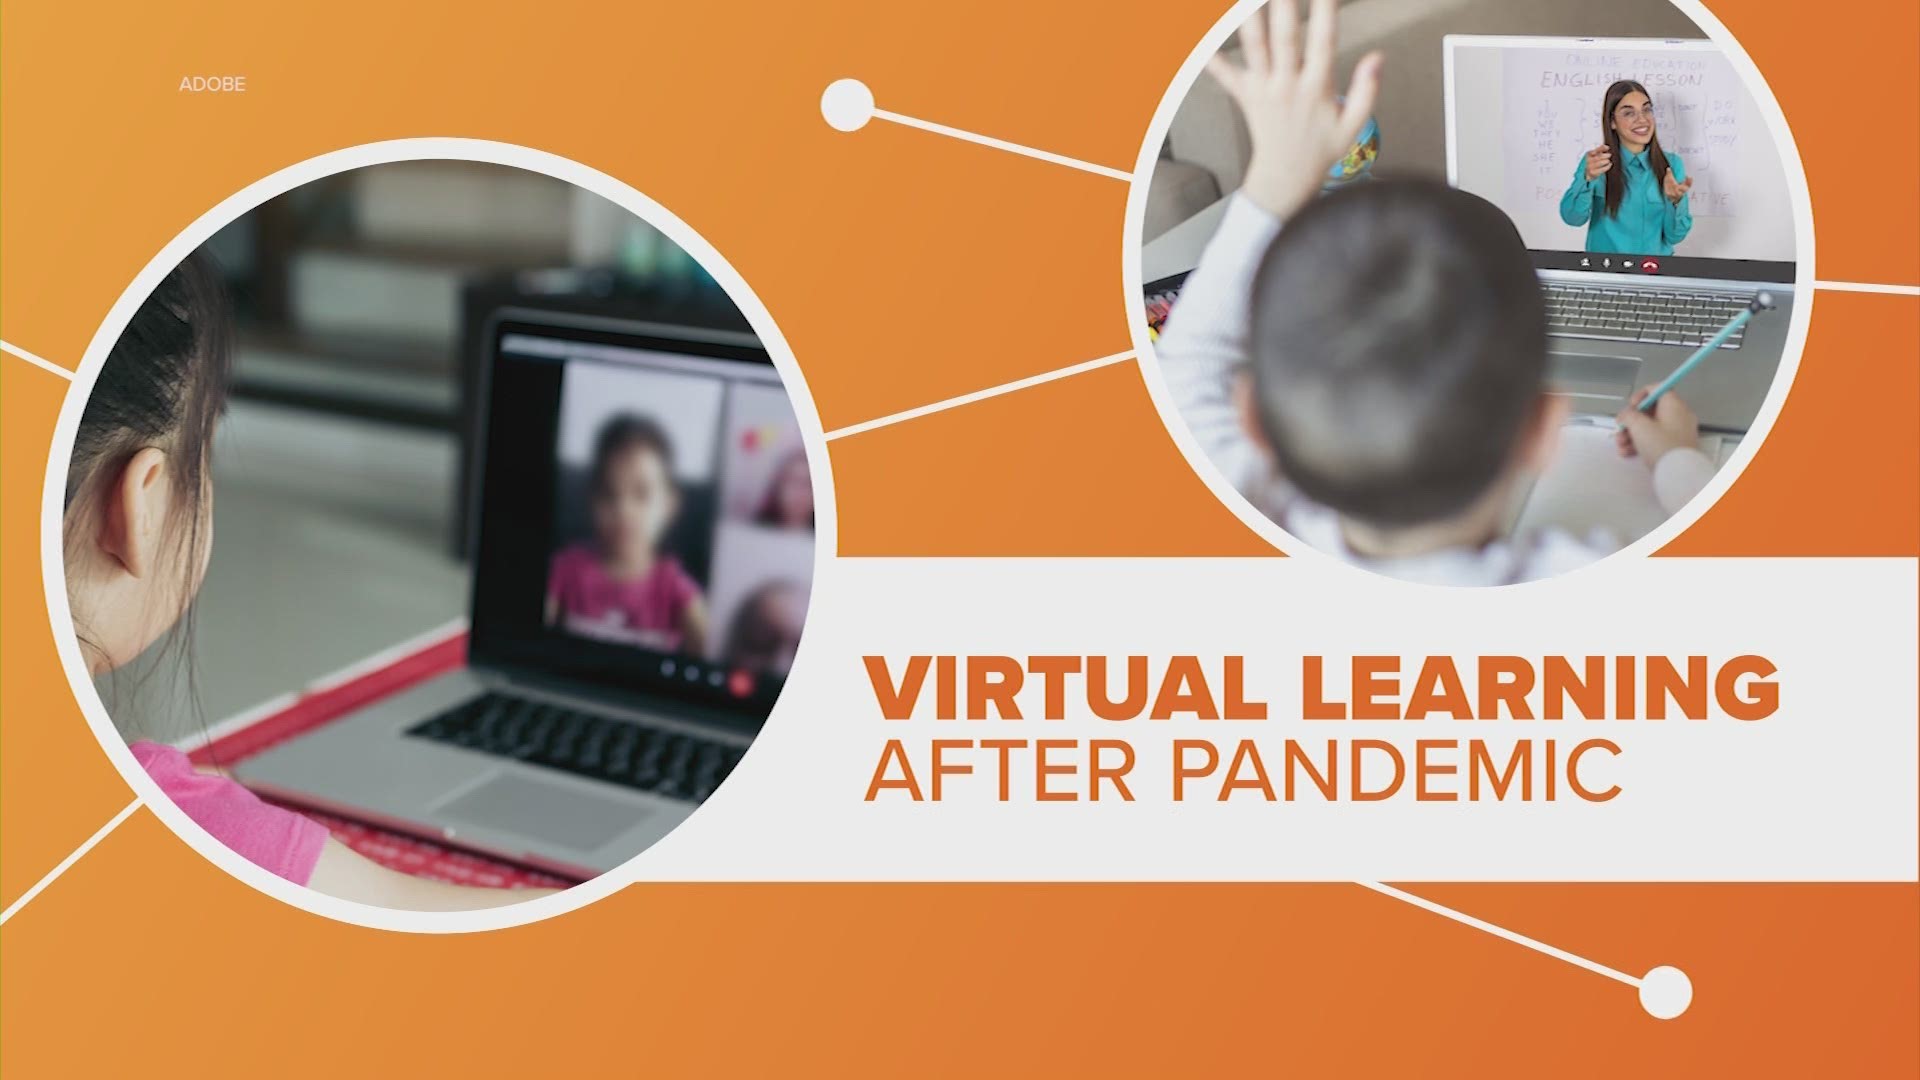 As most of the country eyes a return to normalcy after the COVID-19 pandemic, one change will be sticking around: virtual learning…at least for some students.